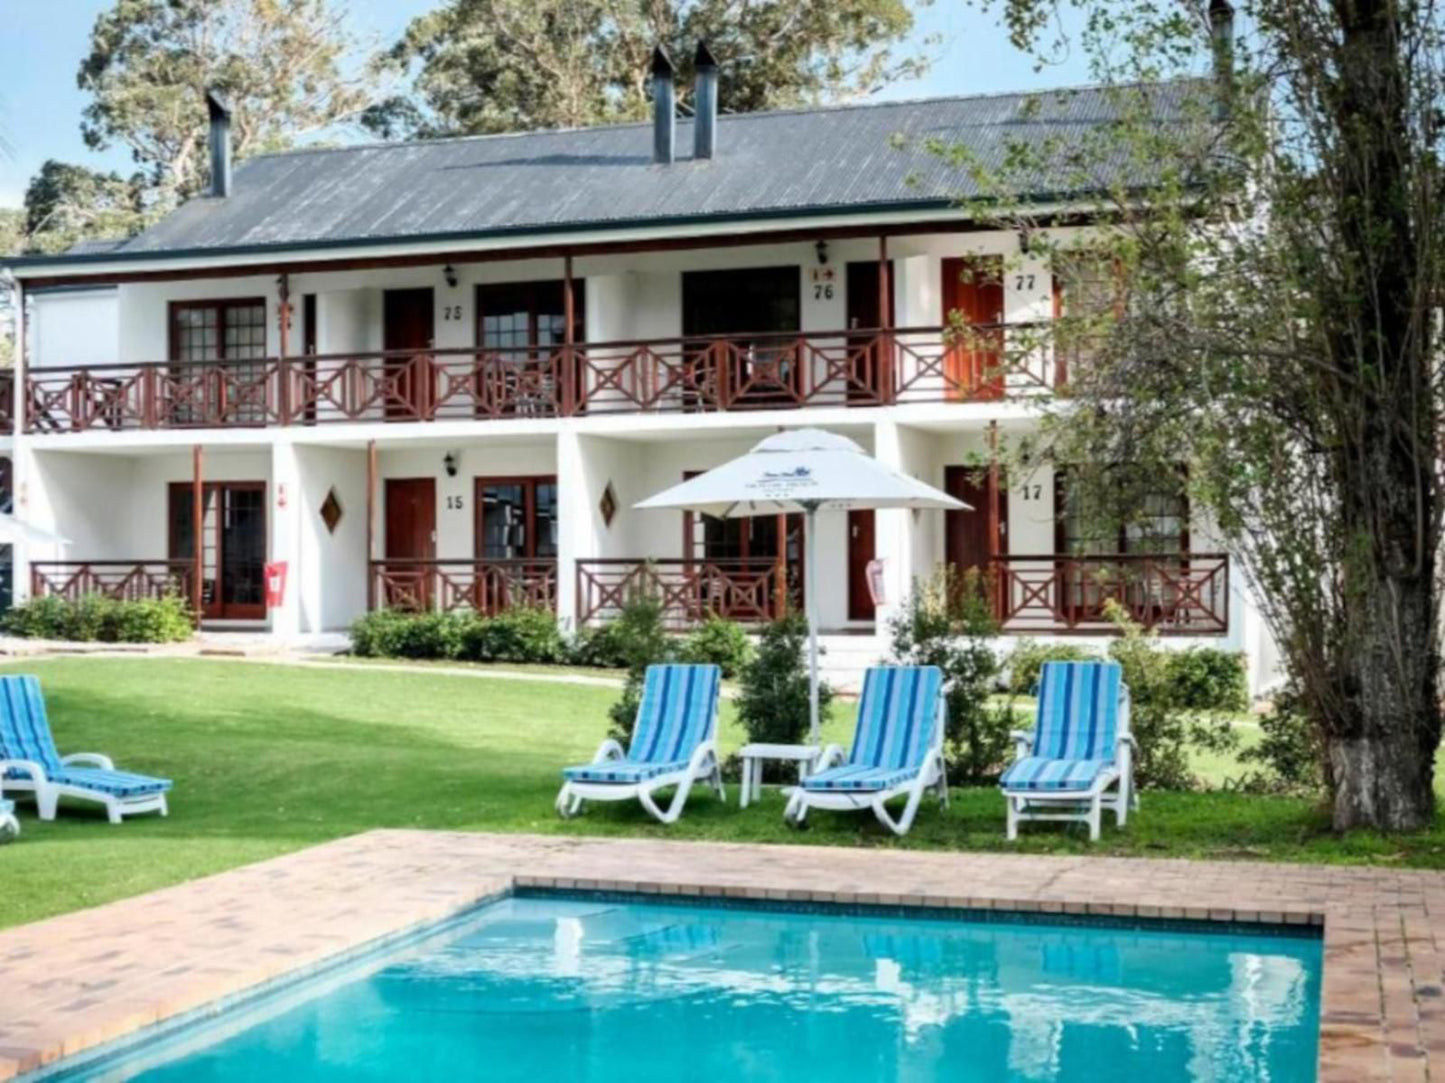 Houw Hoek Hotel Grabouw Western Cape South Africa House, Building, Architecture, Swimming Pool